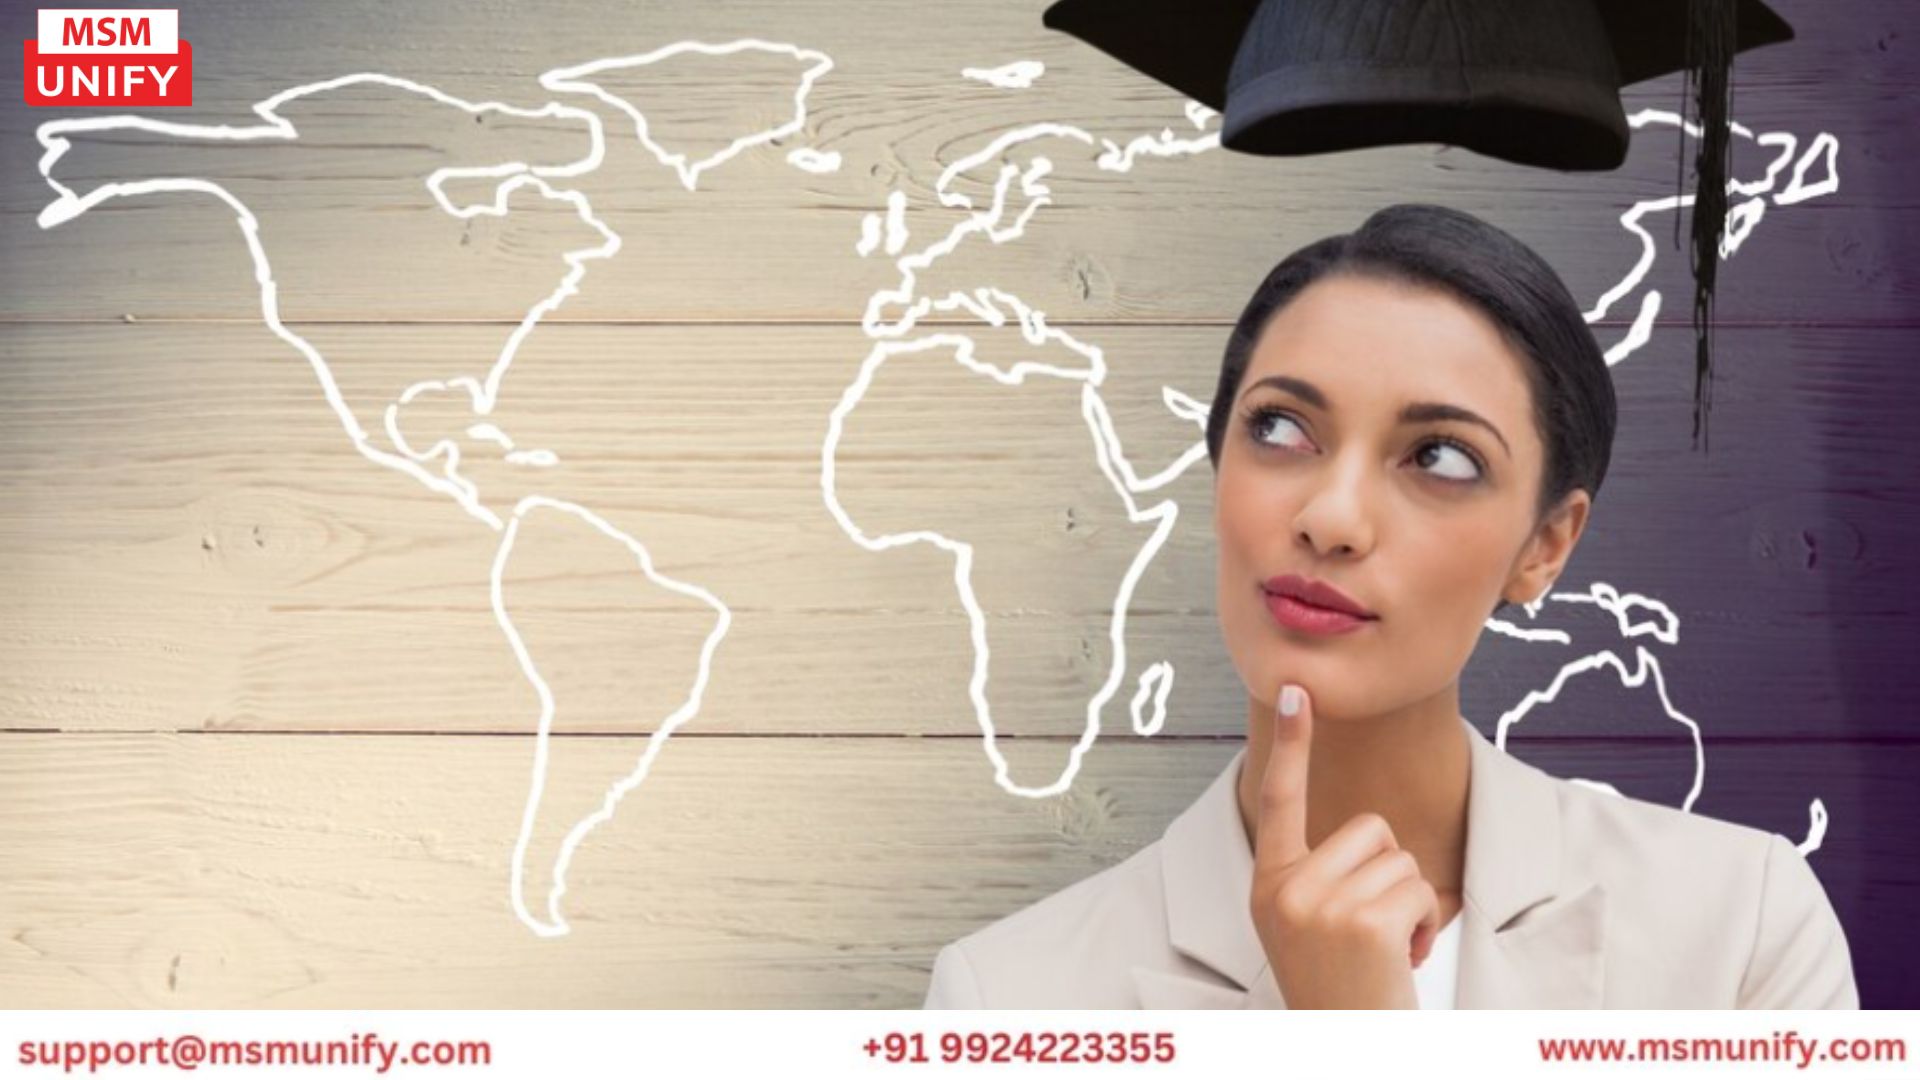 
Discover the Best <a href="https://www.msmunify.com/">overseas education consultant</a> for a Seamless Academic Adventure. Our Expertise Ensures Hassle-Free Transitions and Personalized Support for Your Success!




